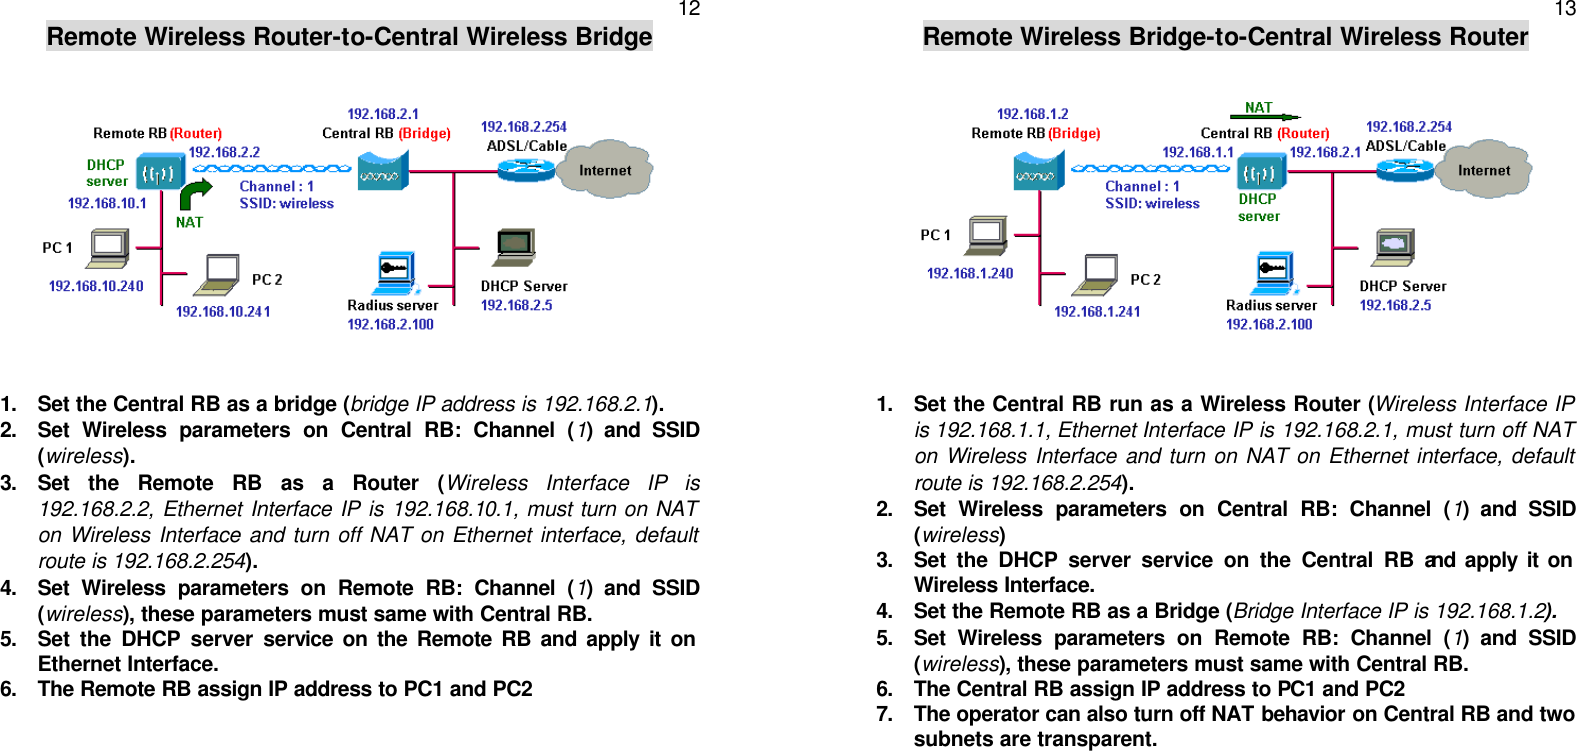   12 Remote Wireless Router-to-Central Wireless Bridge  1. Set the Central RB as a bridge (bridge IP address is 192.168.2.1). 2. Set Wireless parameters on Central RB: Channel (1) and SSID (wireless). 3. Set the Remote RB as a Router (Wireless Interface IP is 192.168.2.2, Ethernet Interface IP is 192.168.10.1, must turn on NAT on Wireless Interface and turn off NAT on Ethernet interface, default route is 192.168.2.254). 4. Set Wireless parameters on Remote RB: Channel (1) and SSID (wireless), these parameters must same with Central RB. 5. Set the DHCP server service on the Remote RB and apply it on Ethernet Interface. 6. The Remote RB assign IP address to PC1 and PC2       13 Remote Wireless Bridge-to-Central Wireless Router  1. Set the Central RB run as a Wireless Router (Wireless Interface IP is 192.168.1.1, Ethernet Interface IP is 192.168.2.1, must turn off NAT on Wireless Interface and turn on NAT on Ethernet interface, default route is 192.168.2.254). 2. Set Wireless parameters on Central RB: Channel (1) and SSID (wireless) 3. Set the DHCP server service on the Central RB and apply it on Wireless Interface. 4. Set the Remote RB as a Bridge (Bridge Interface IP is 192.168.1.2).  5. Set Wireless parameters on Remote RB: Channel (1) and SSID (wireless), these parameters must same with Central RB. 6. The Central RB assign IP address to PC1 and PC2 7. The operator can also turn off NAT behavior on Central RB and two subnets are transparent.    